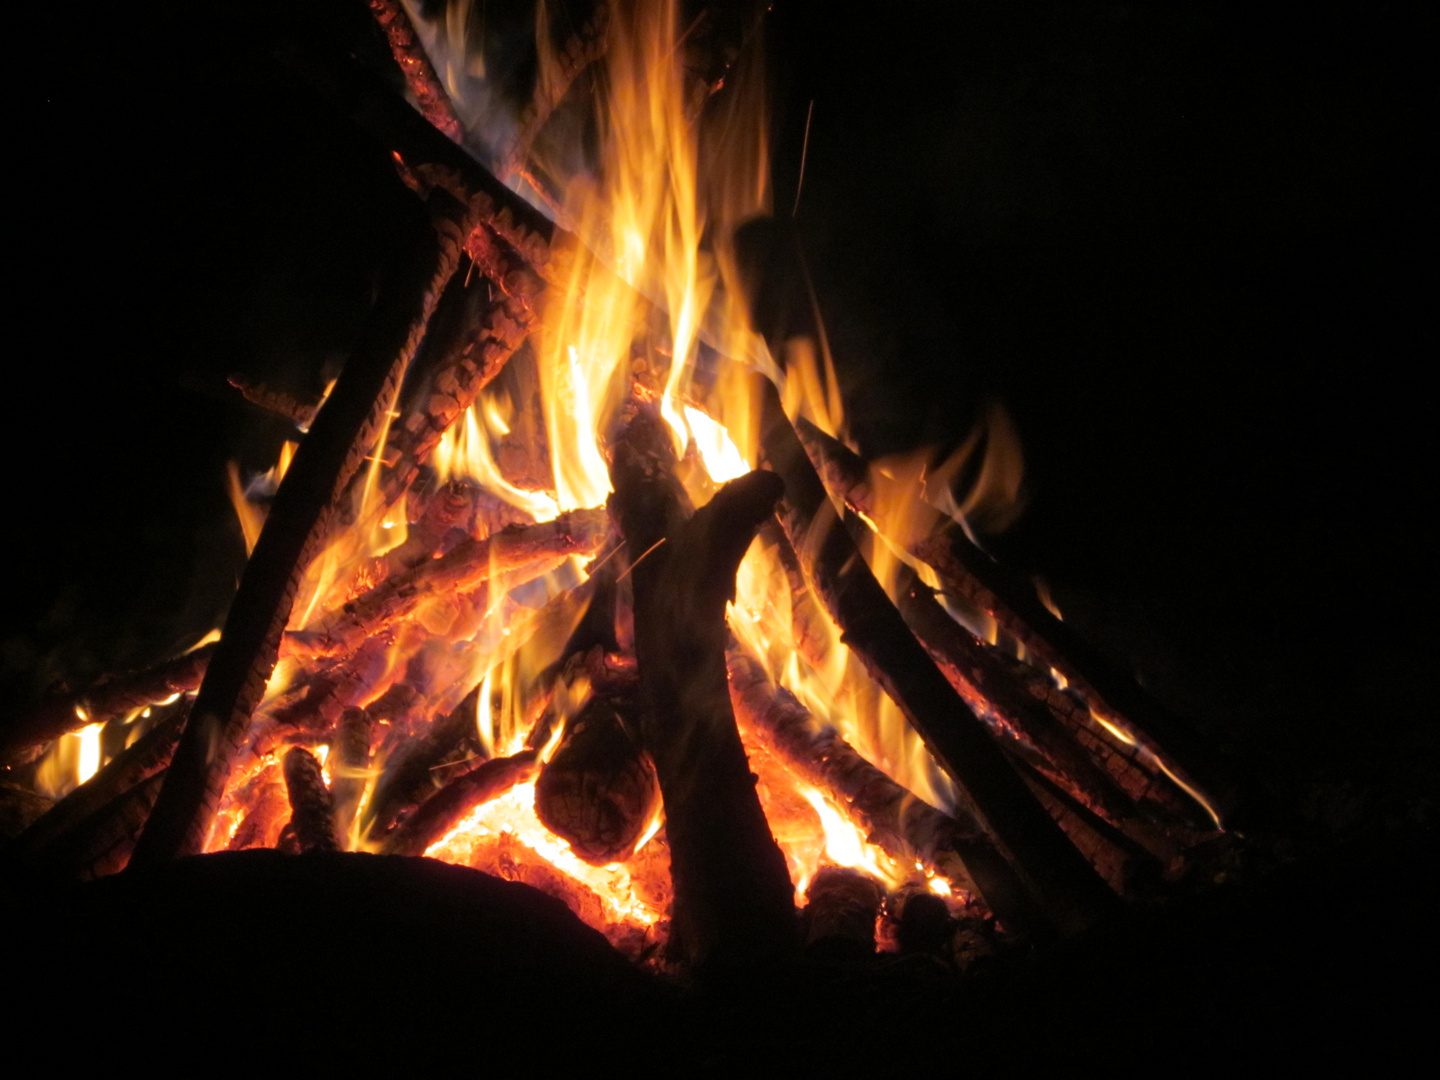 am Lagerfeuer